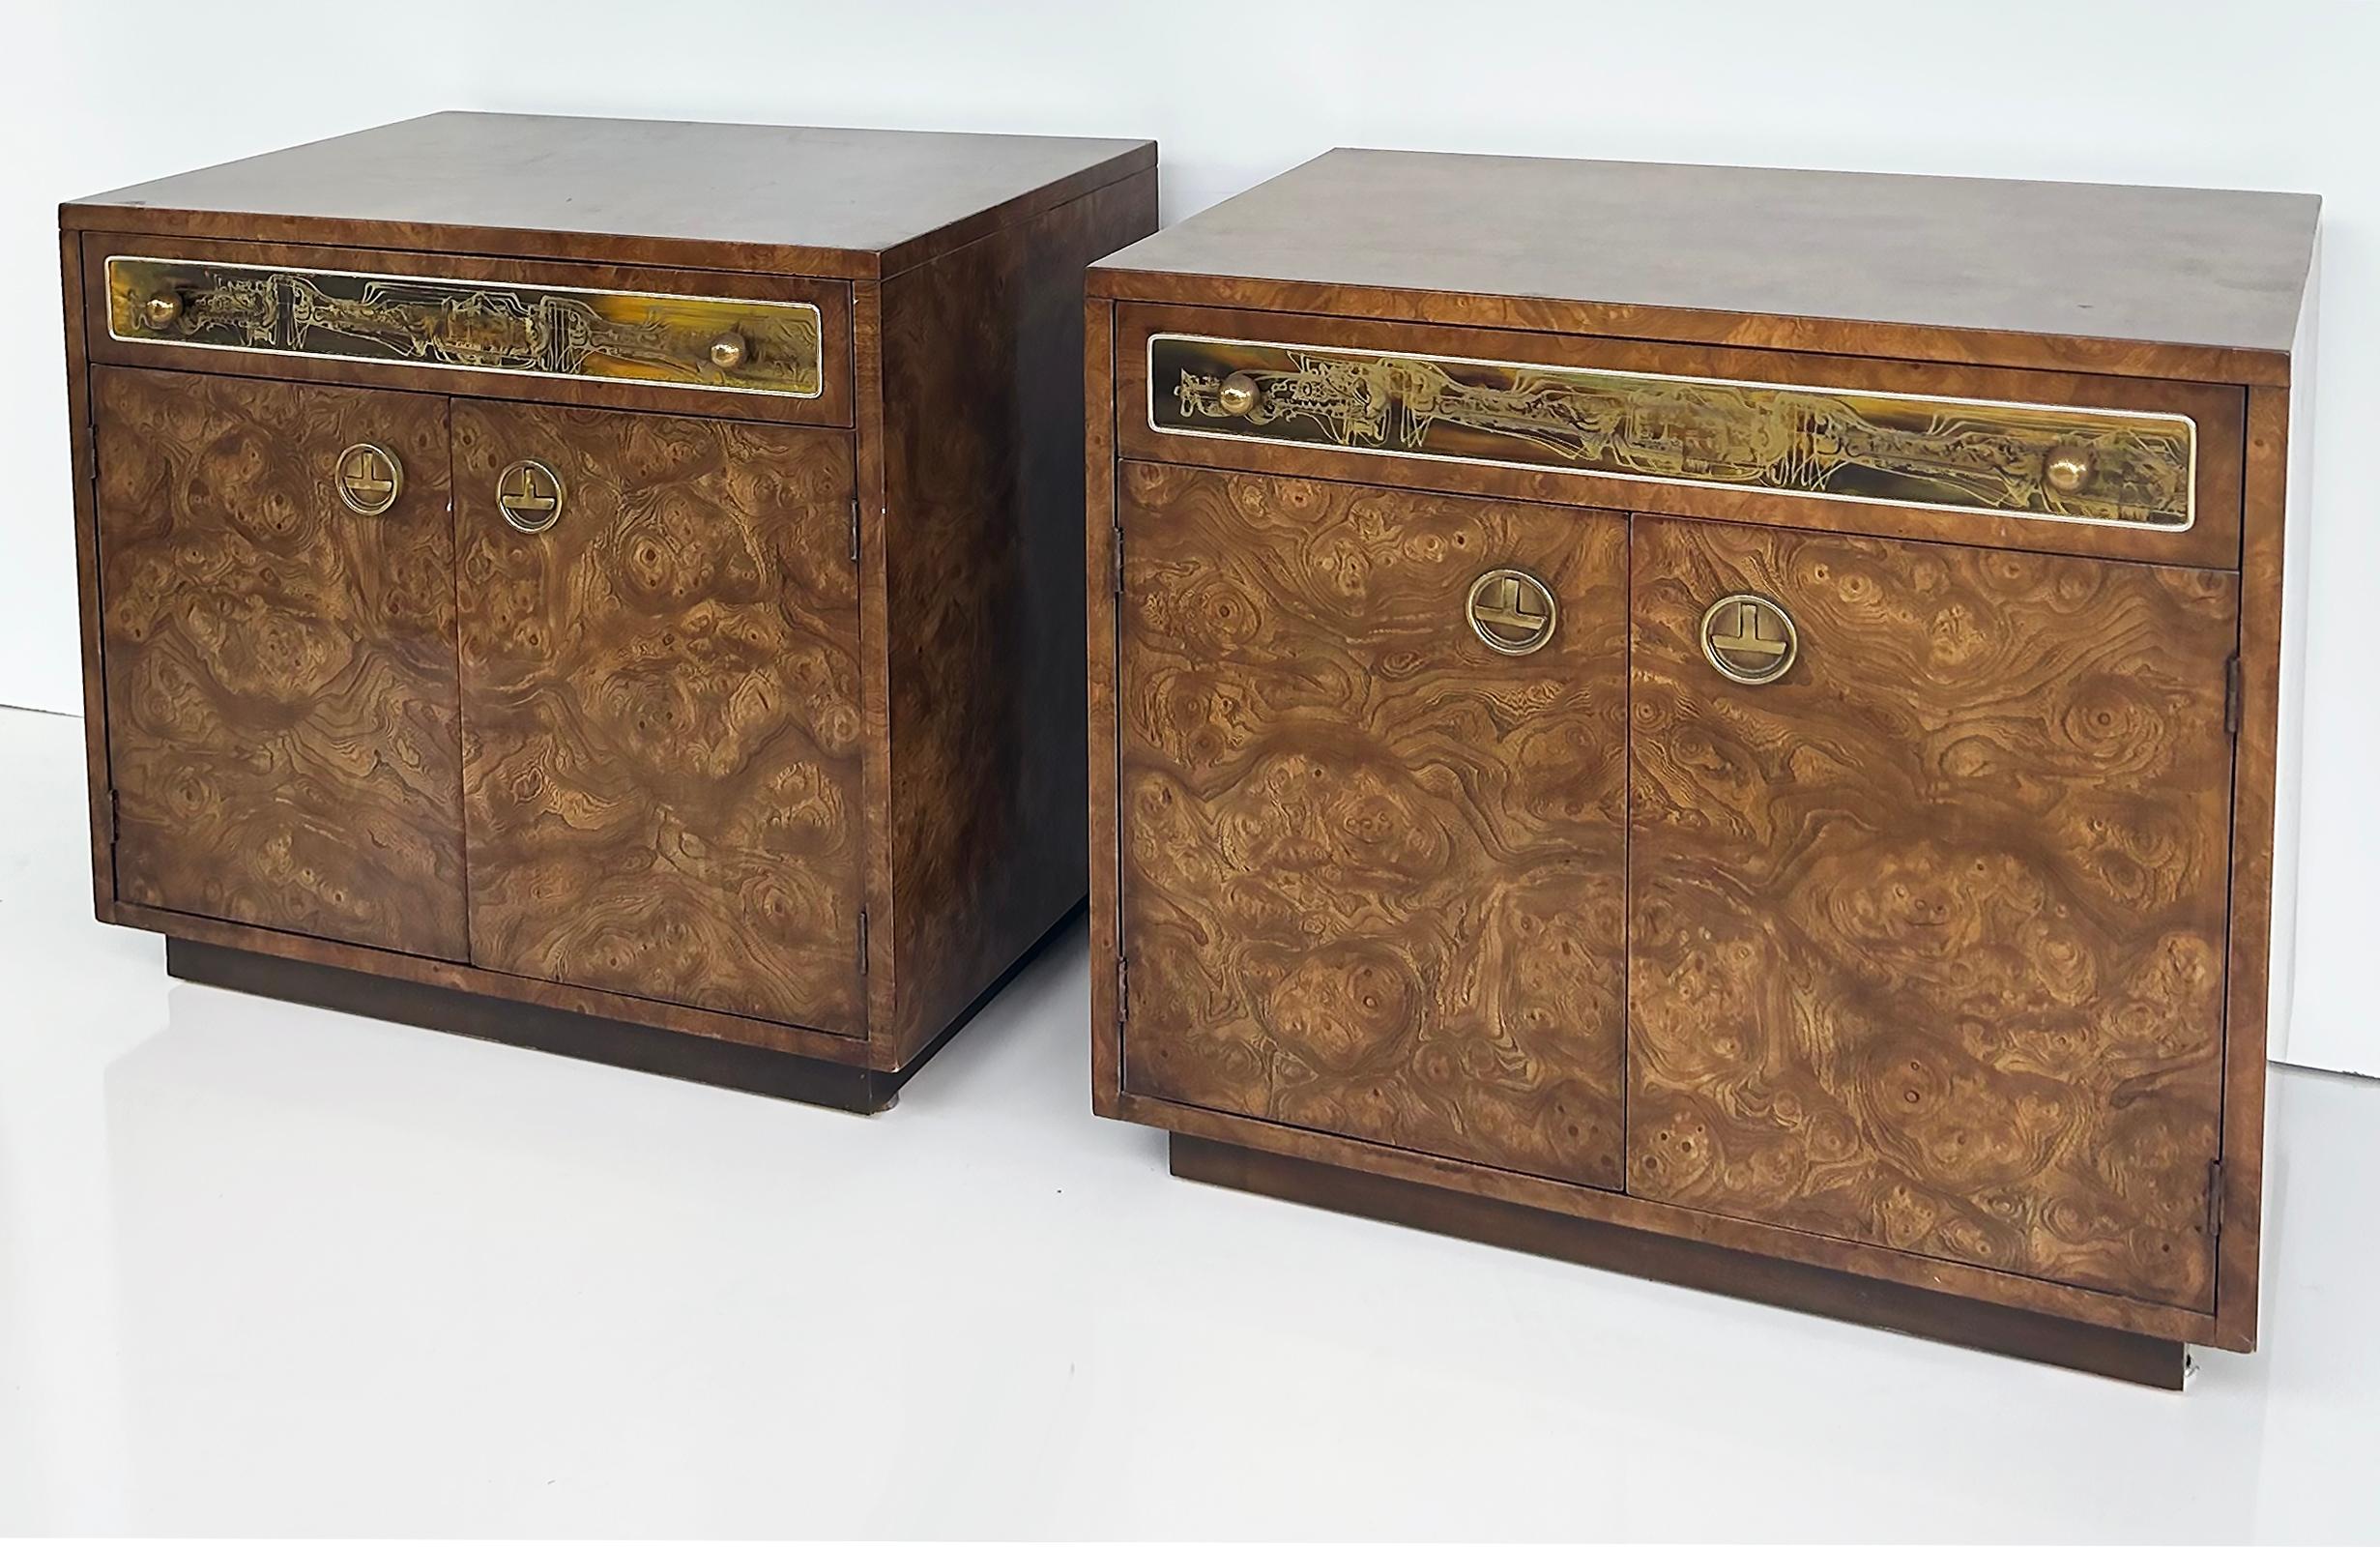 Bernhard Rohne Mastercraft Burl / Etched Brass Night Stands c1970

Offered for sale is a pair of Bernhard Rohne for Mastercraft burl wood and acid-etched nightstands in wonderful original vintage condition.  These were purchased from the original